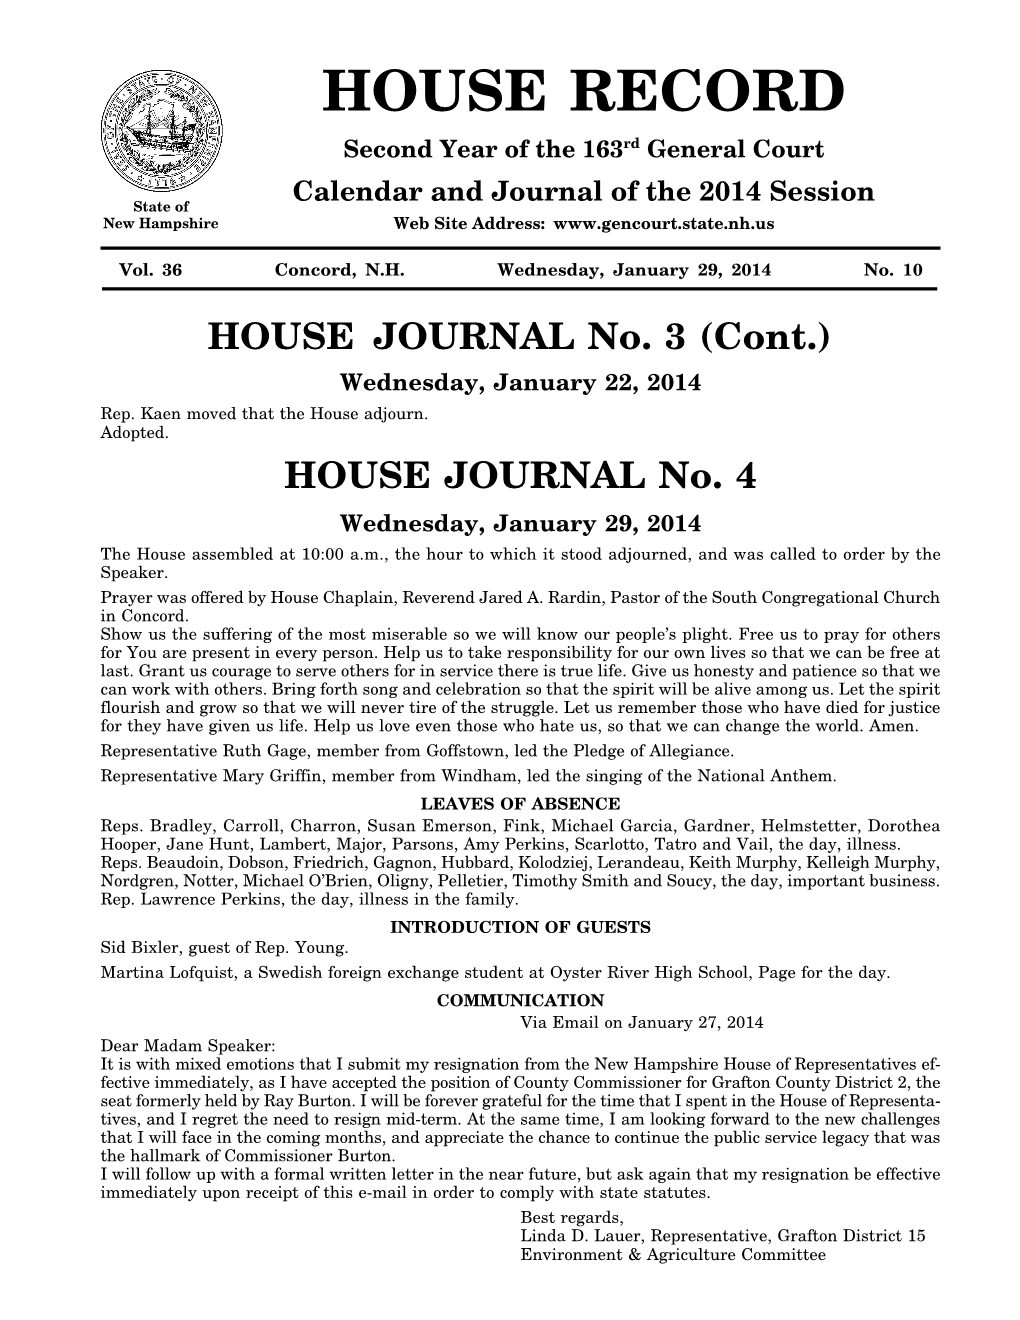 HOUSE RECORD Second Year of the 163Rd General Court